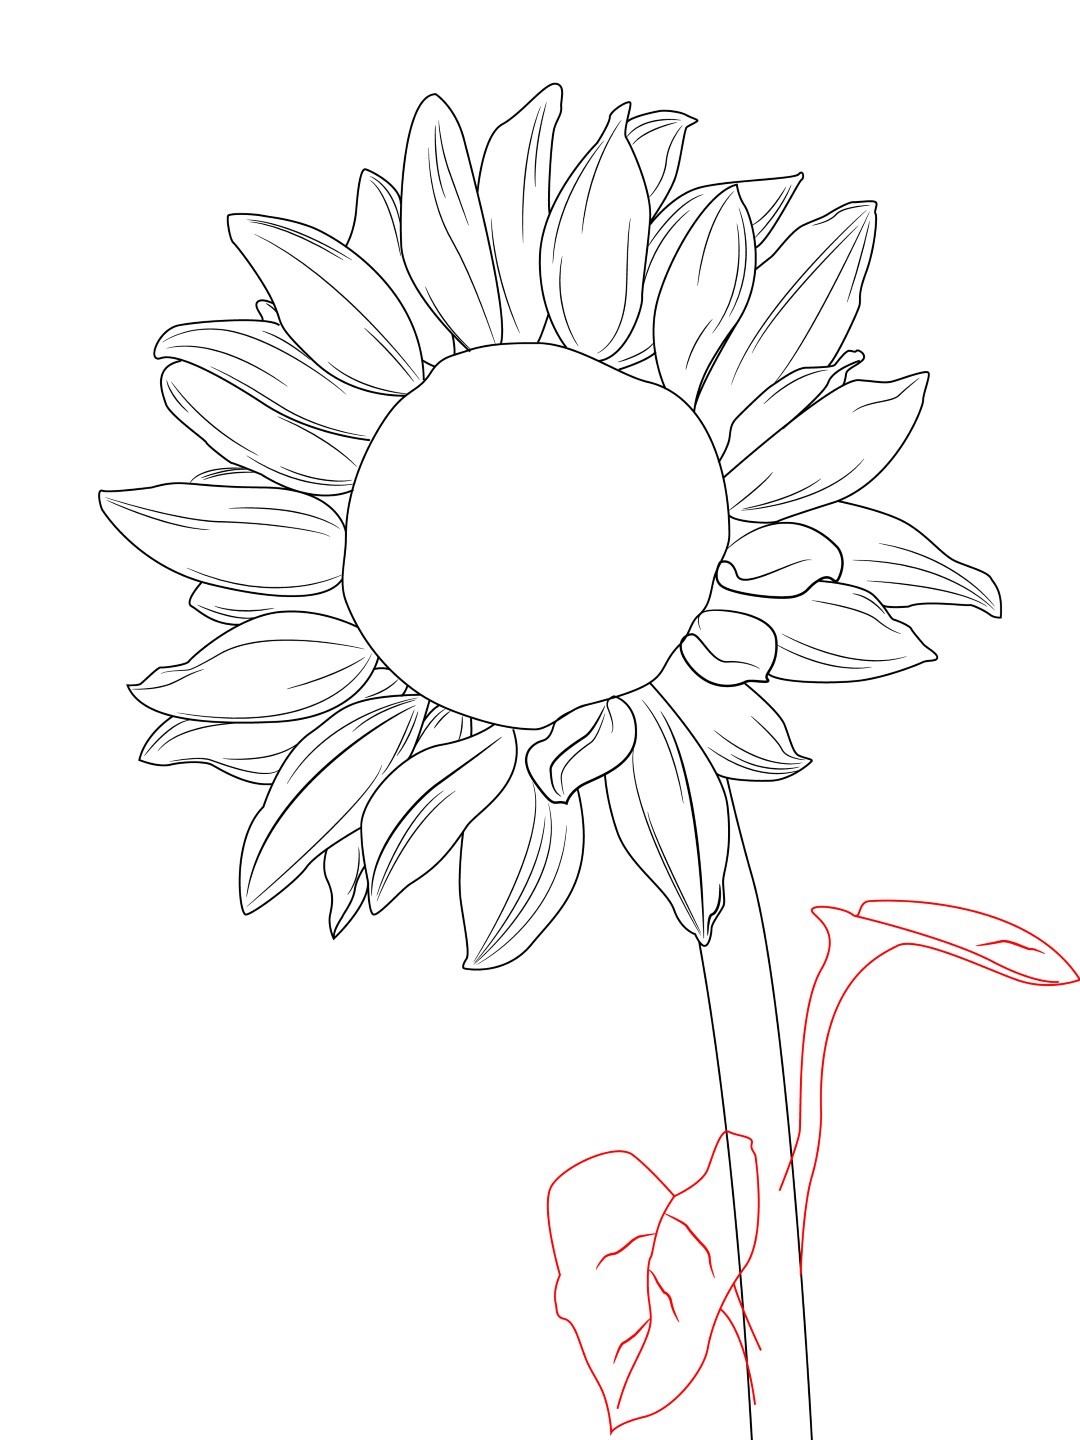 Sunflower Cartoon Drawing at Free for